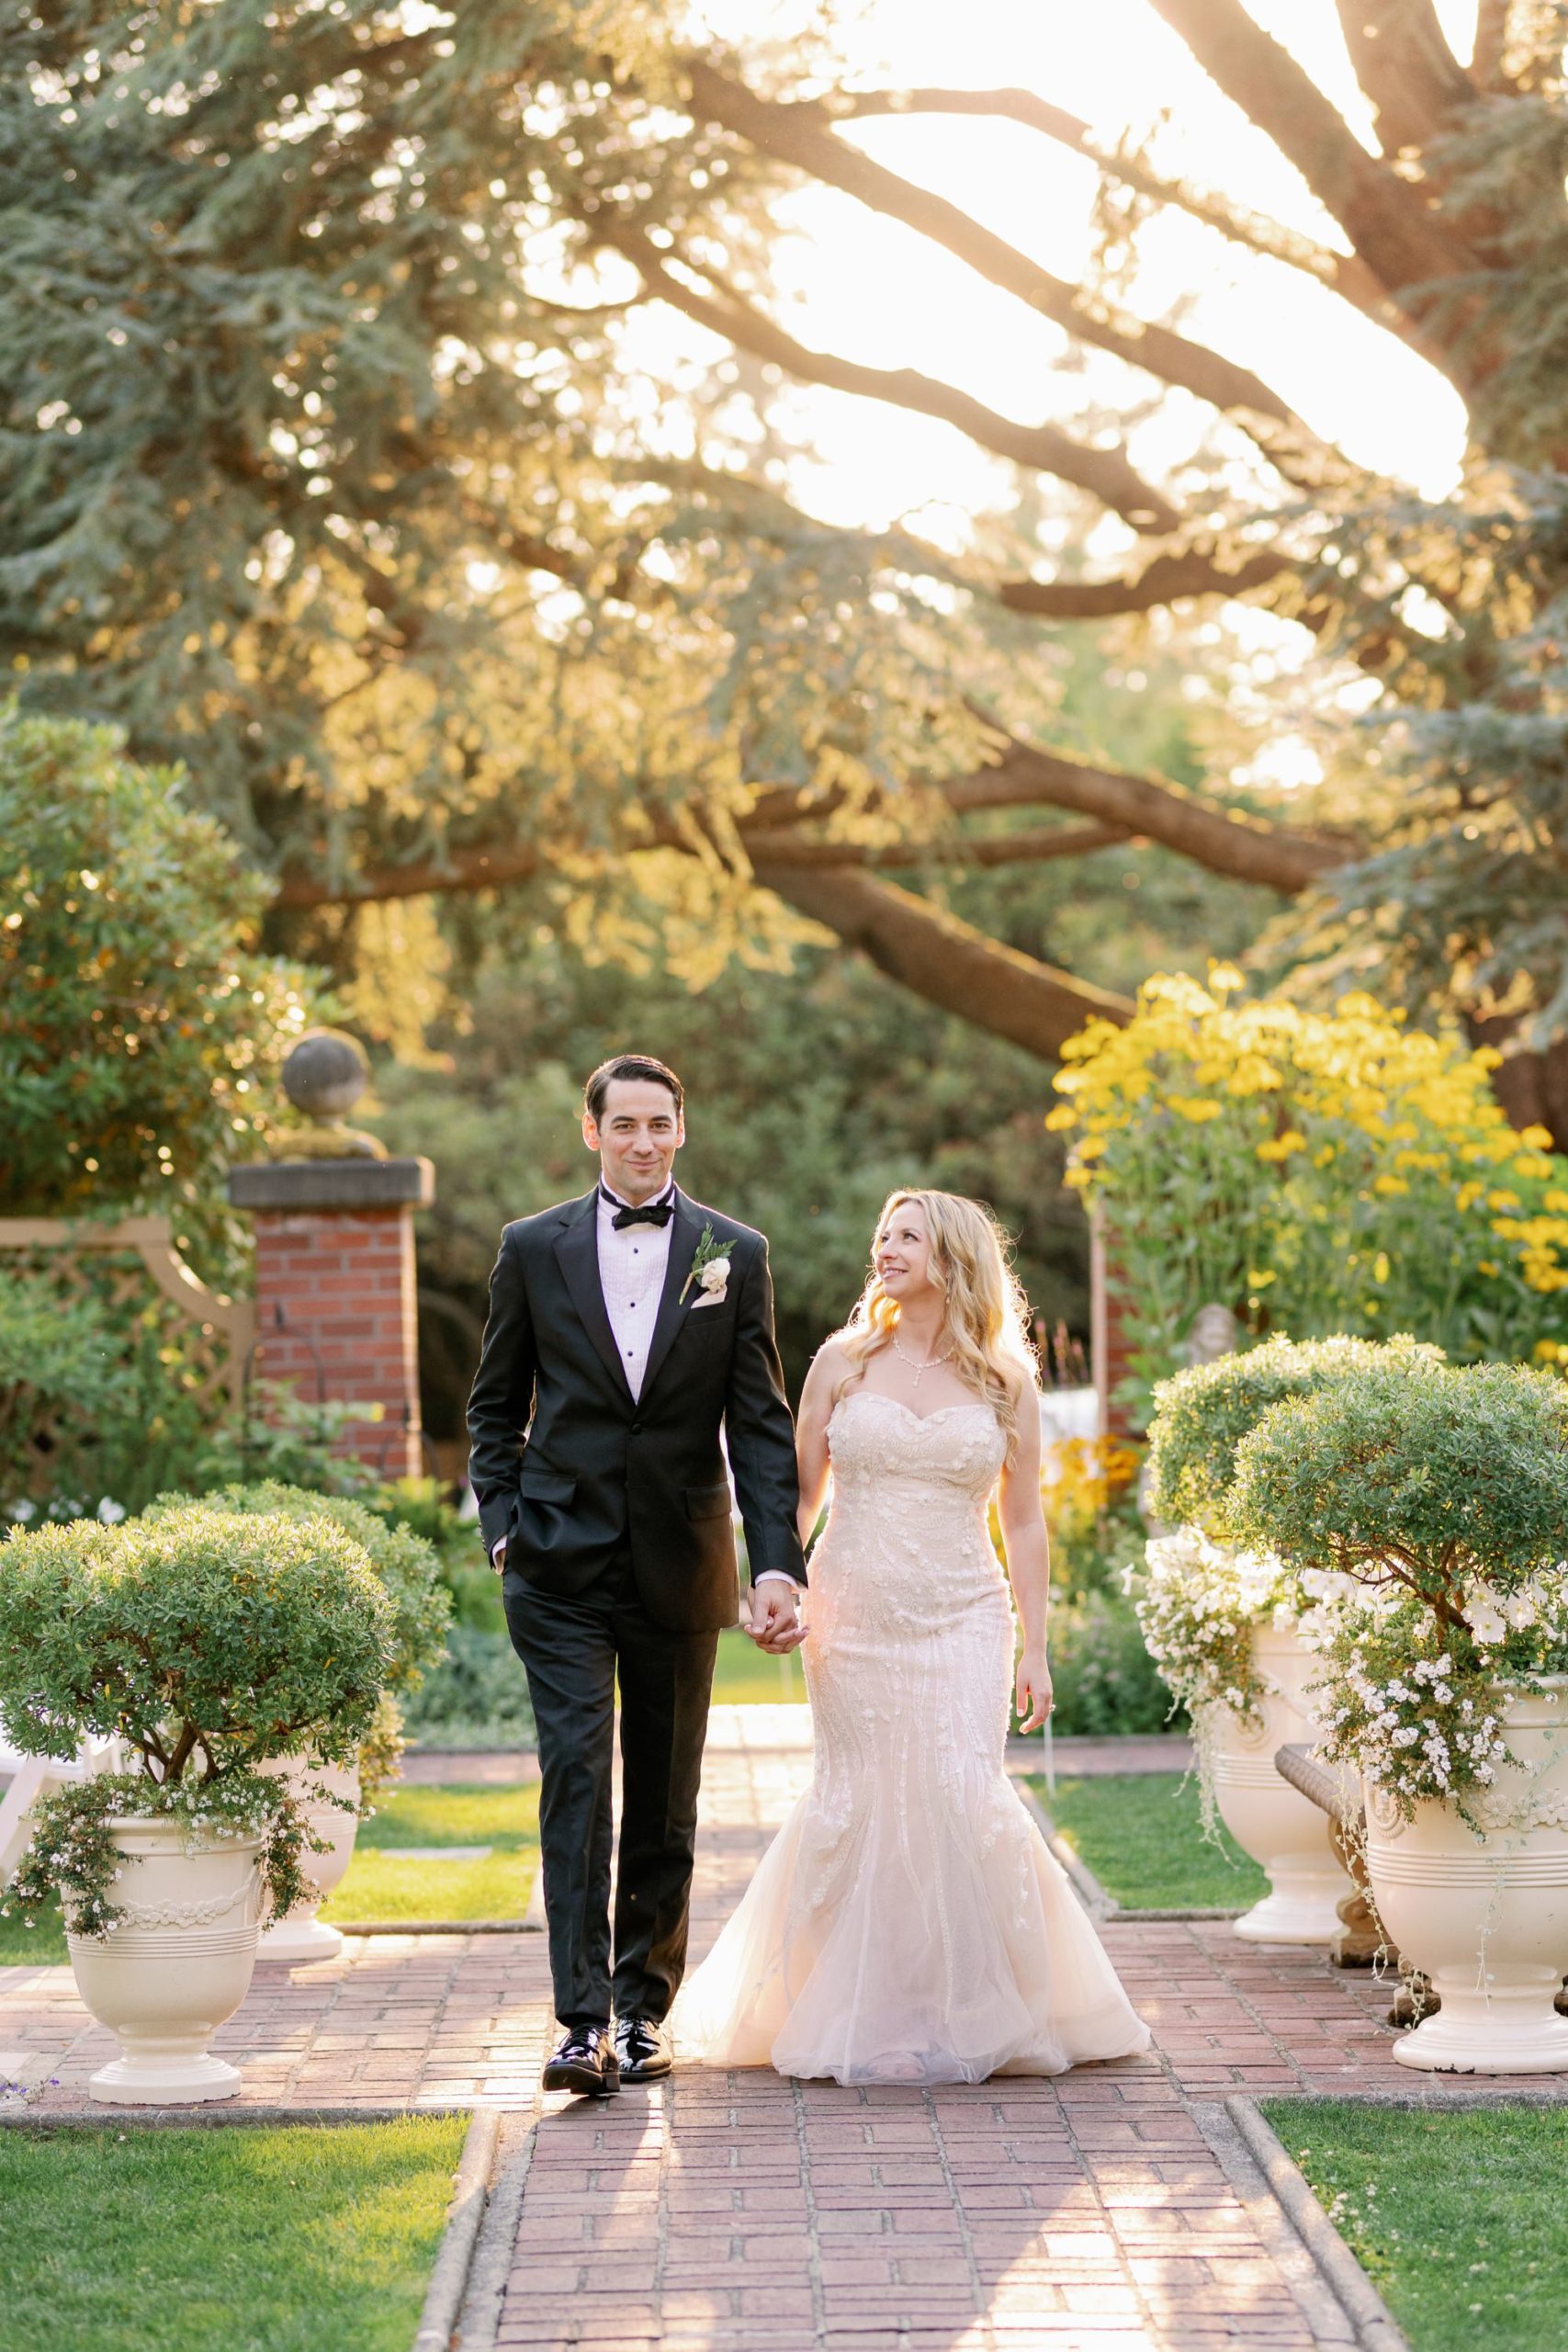 A bride and groom hold hands while walking through the garden at Lairmont Manor during sunset.